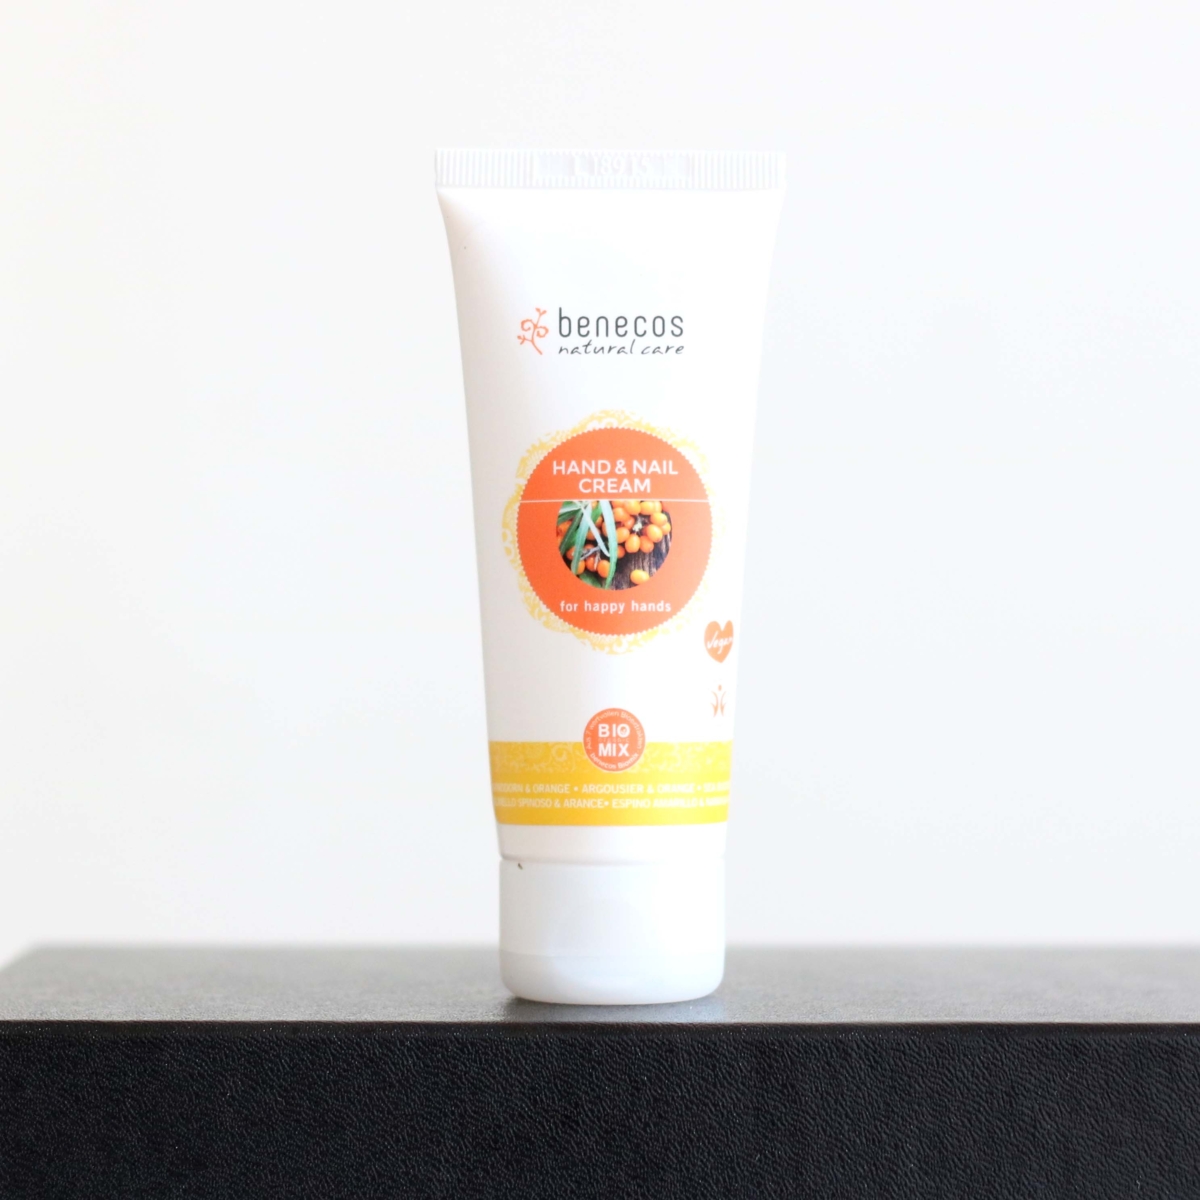 Latest in Beauty Build Your Own Box Review - Benecos Hand & Nail Cream